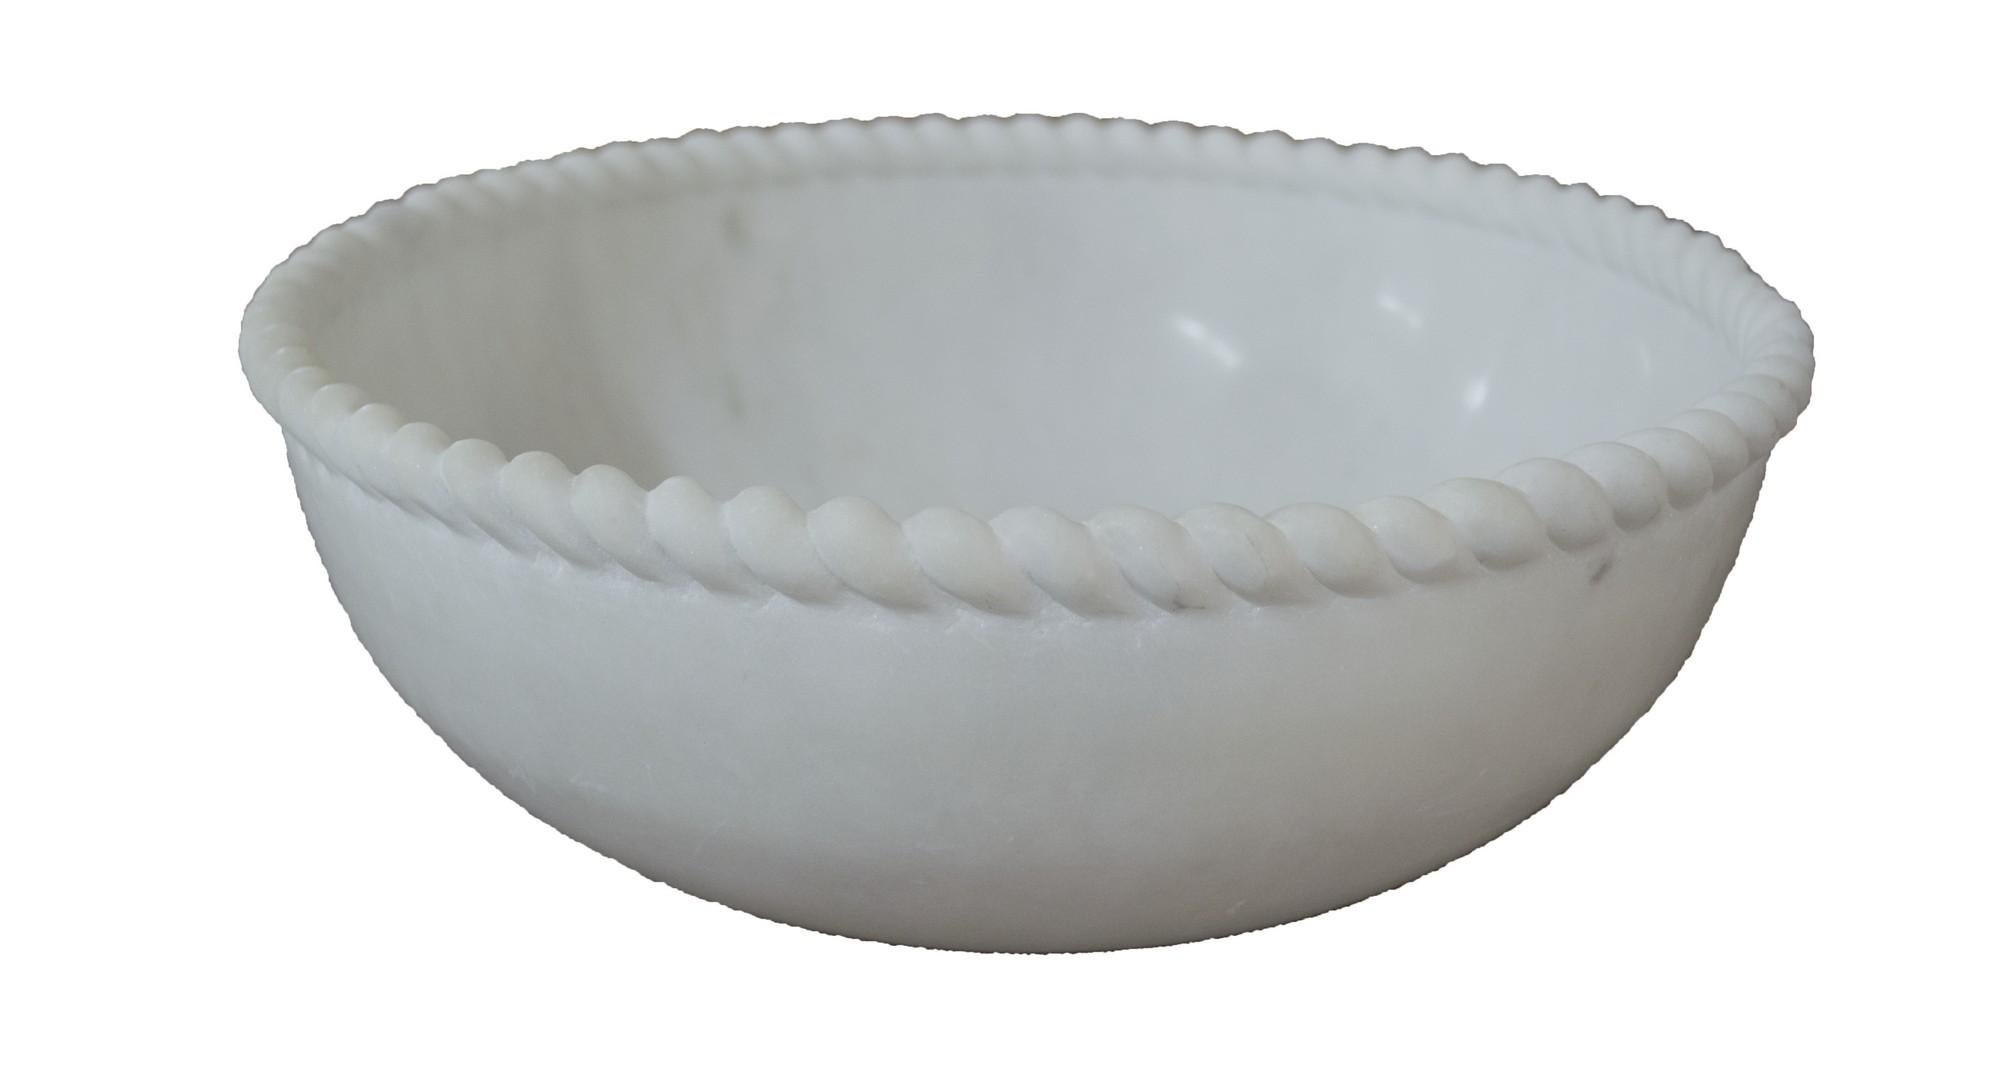 Sculpted out of a single block of marble with a delicately carved rope edge, perfect for a potpourri, a fruit bowl or just a key catch.


Round Rope Bowl in White Marble
Size- 8.5” x 8.5” x 3.5” H.
Materials - White Marble, Hand-Carved


Buyer